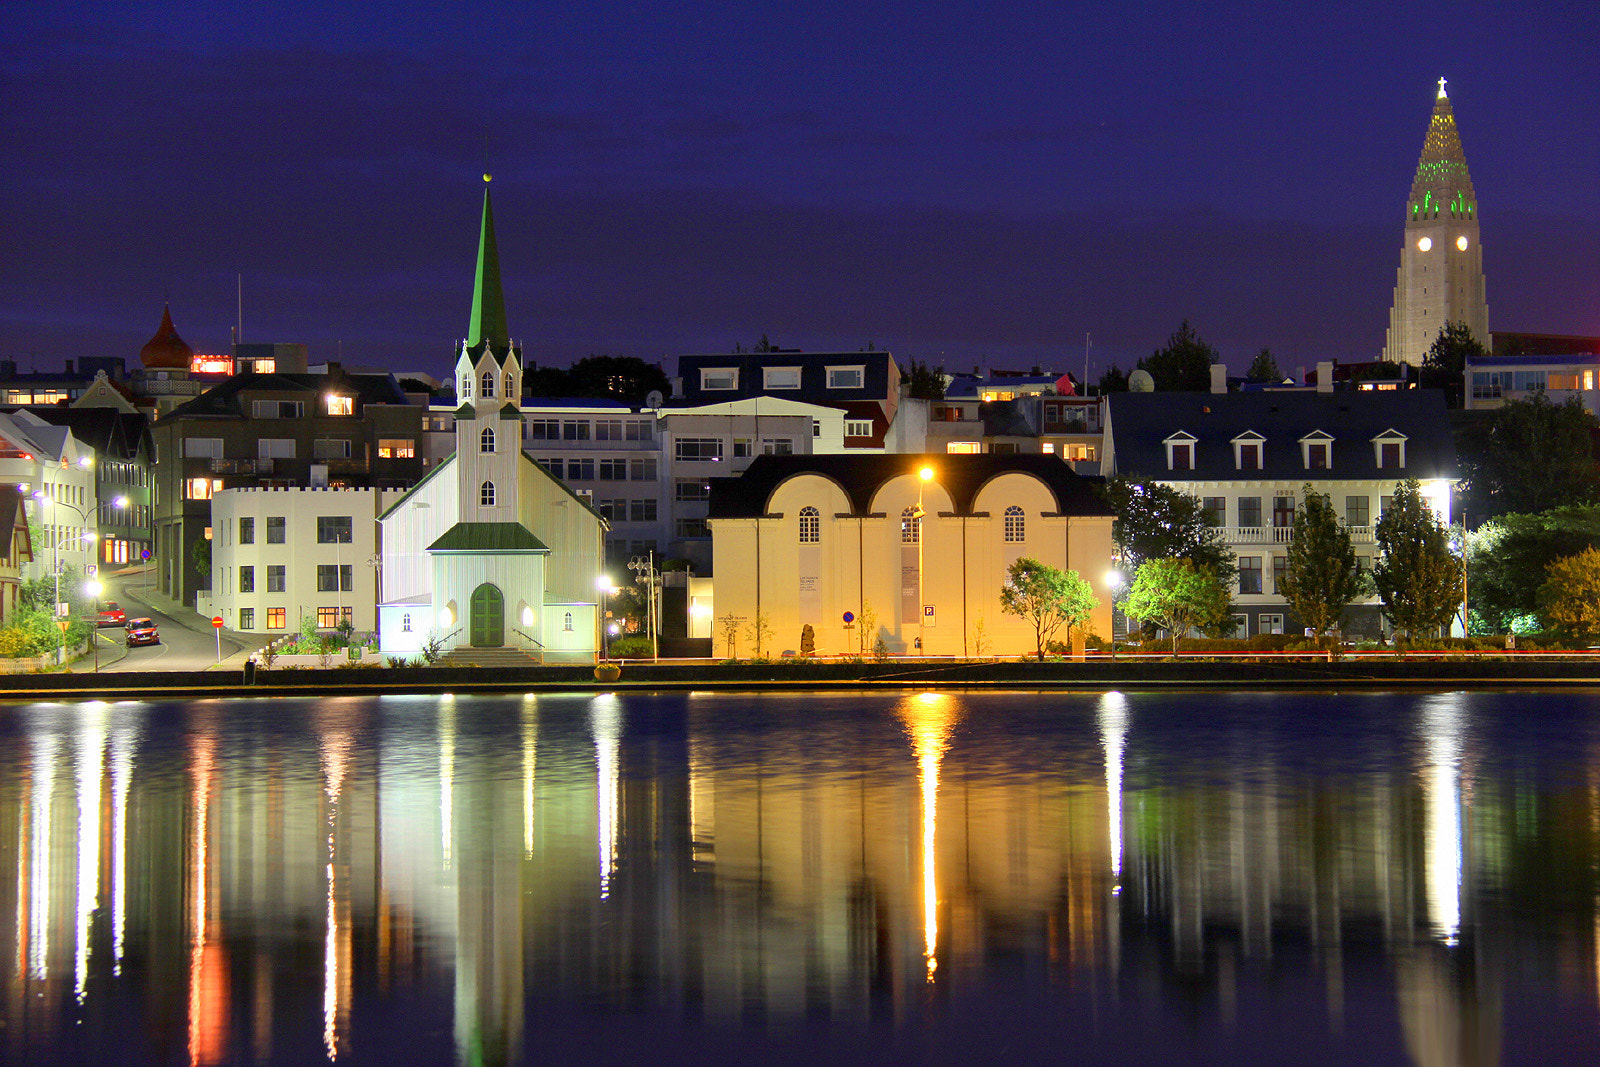 Things You Need to Know About Iceland: Nightlife in Reykjavik